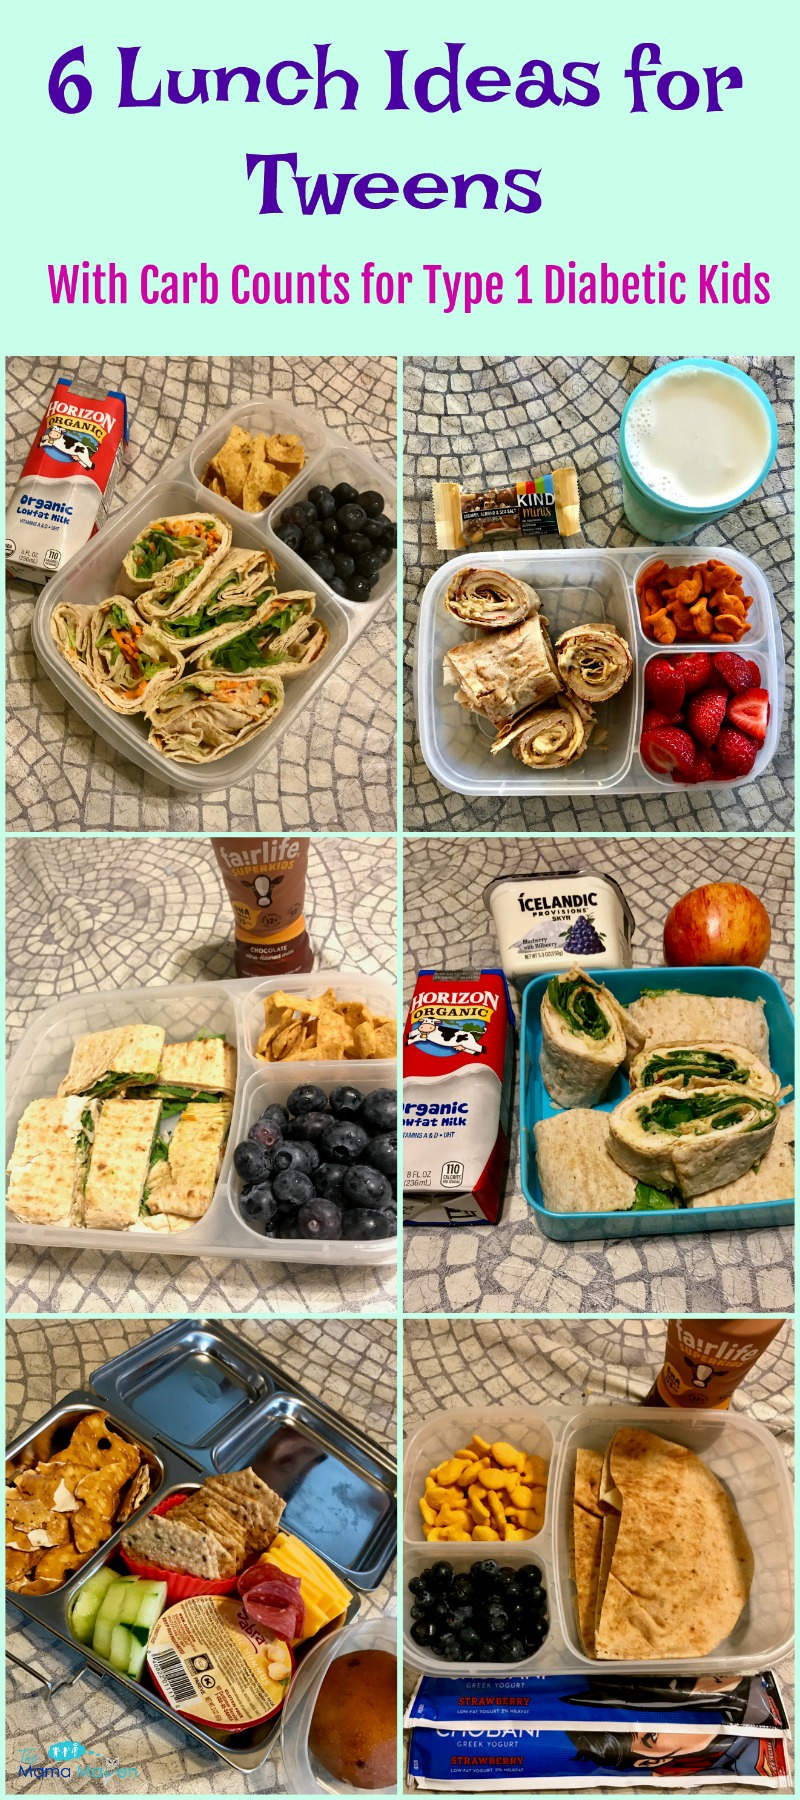 6 lunch ideas for tweens - with carb counts for type 1 diabetic kids